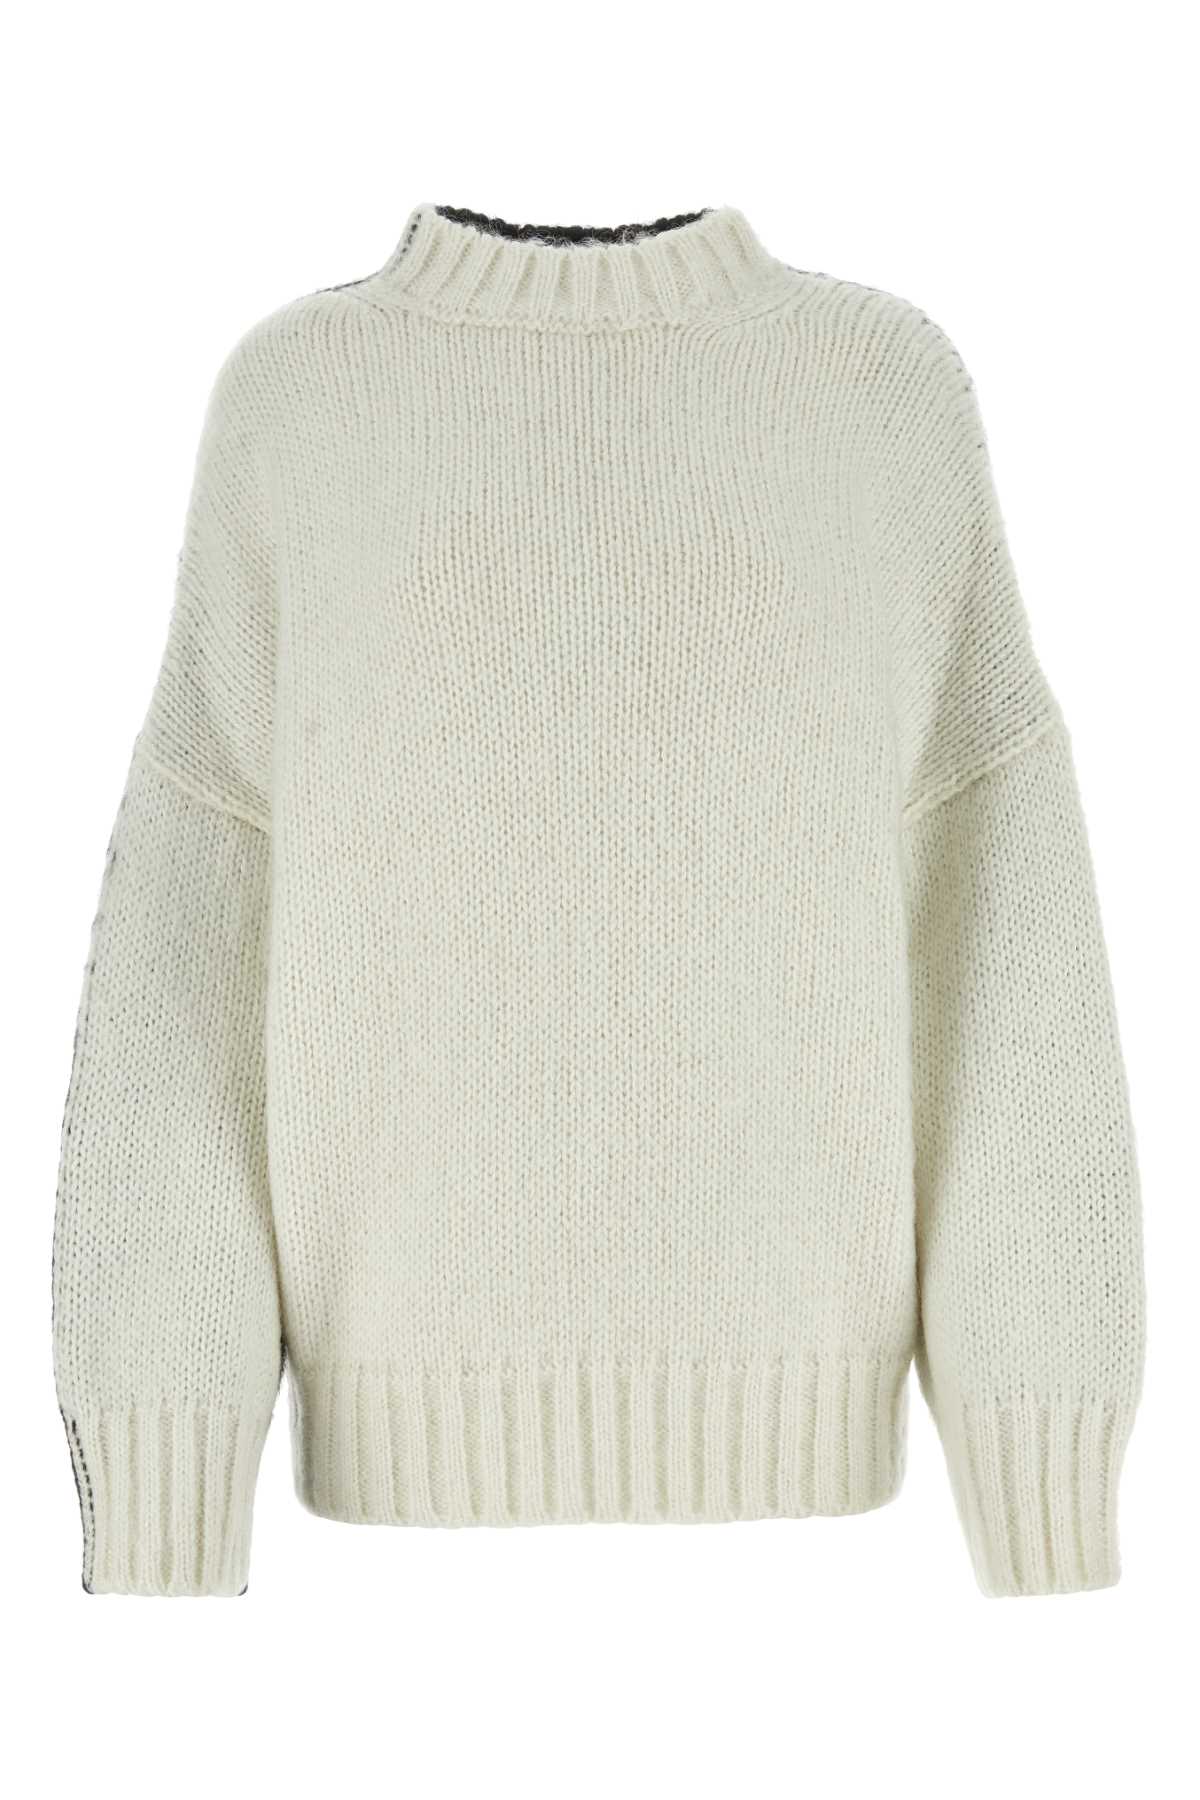 J.W. Anderson Two-tone Acrylic Blend Sweater